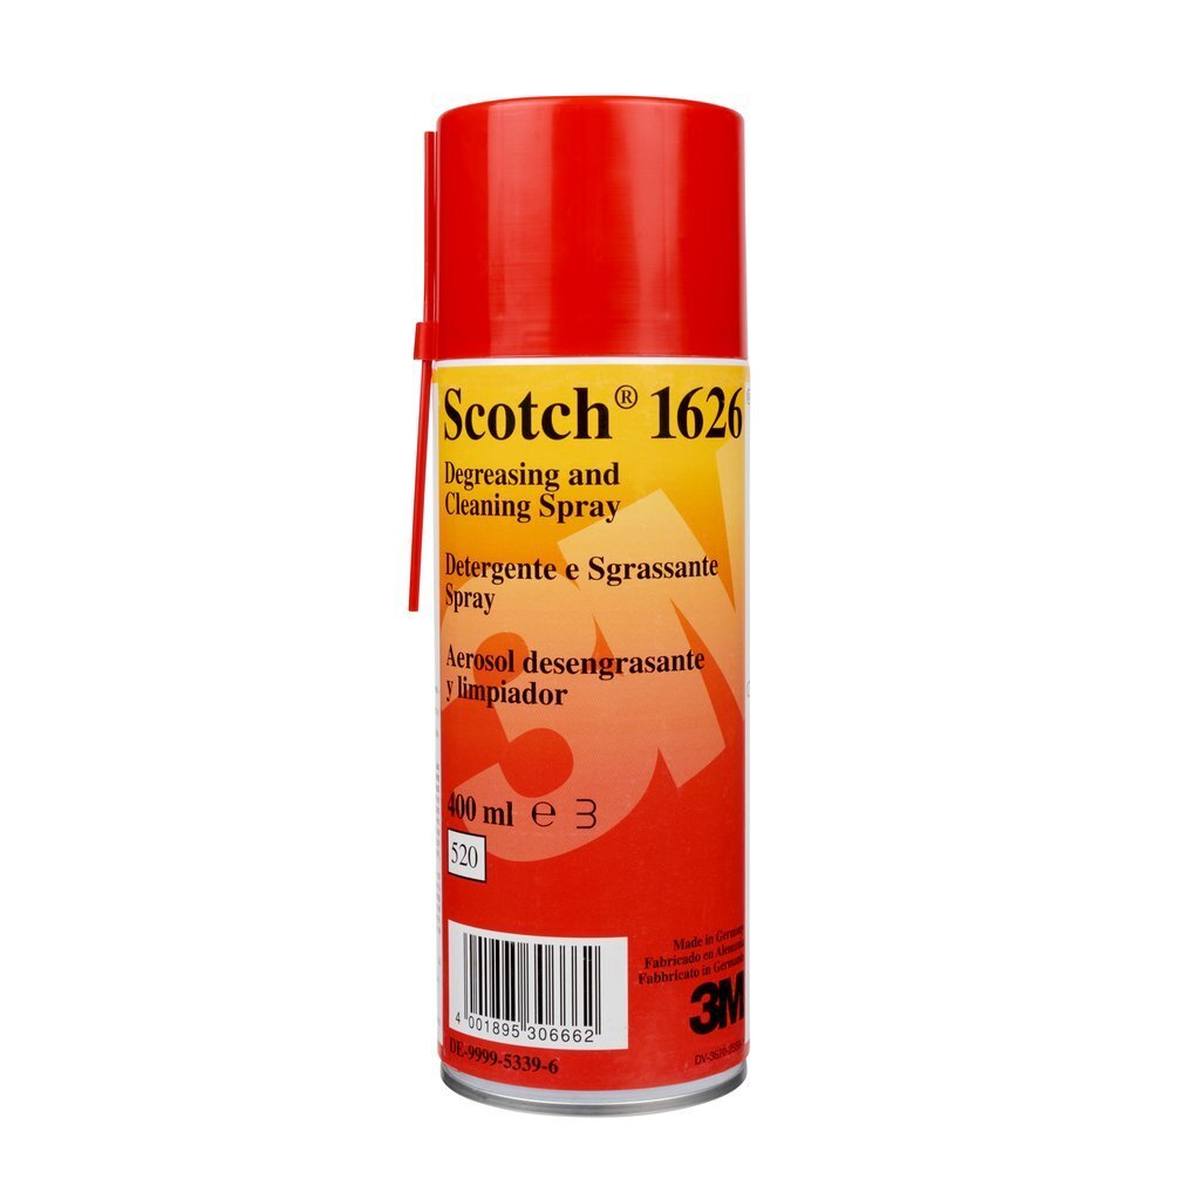 3M Scotch 1626 Cleaning and degreasing spray, 400 ml